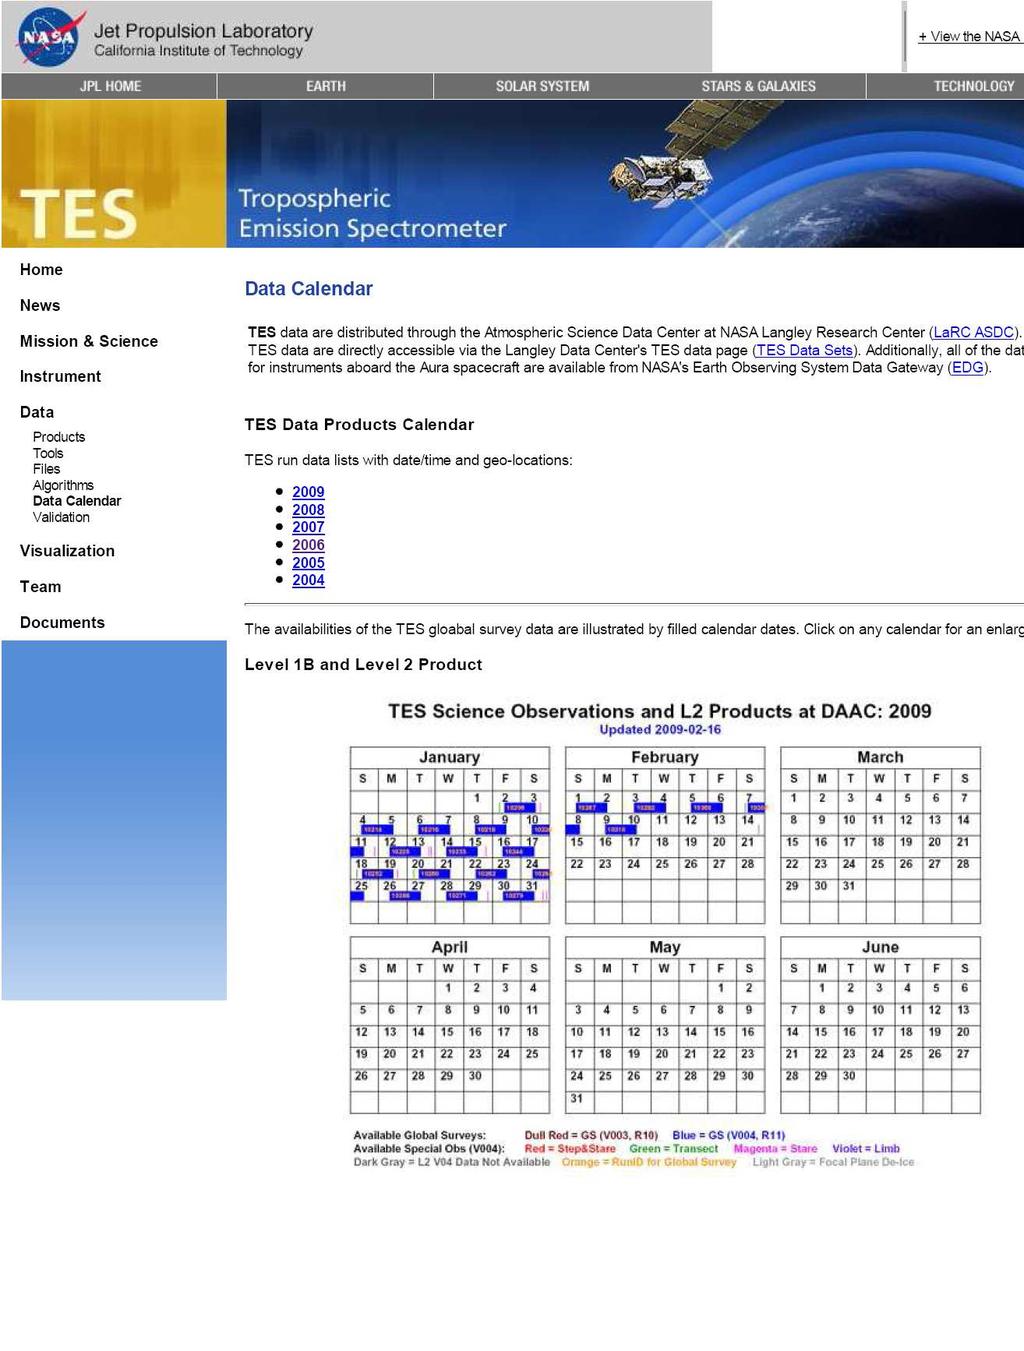 http://tes.jpl.nasa.gov/data/datacalendar/ Click on 2006, and see one nadir option: 3329 Global Survey - 16 orbits 2006-02-13T09:55:26 2006-02- 14T12:15:25 3. Quick look plots Go to http://tes.jpl.nasa.gov/visualization/science_plots/tes_l3_daily.